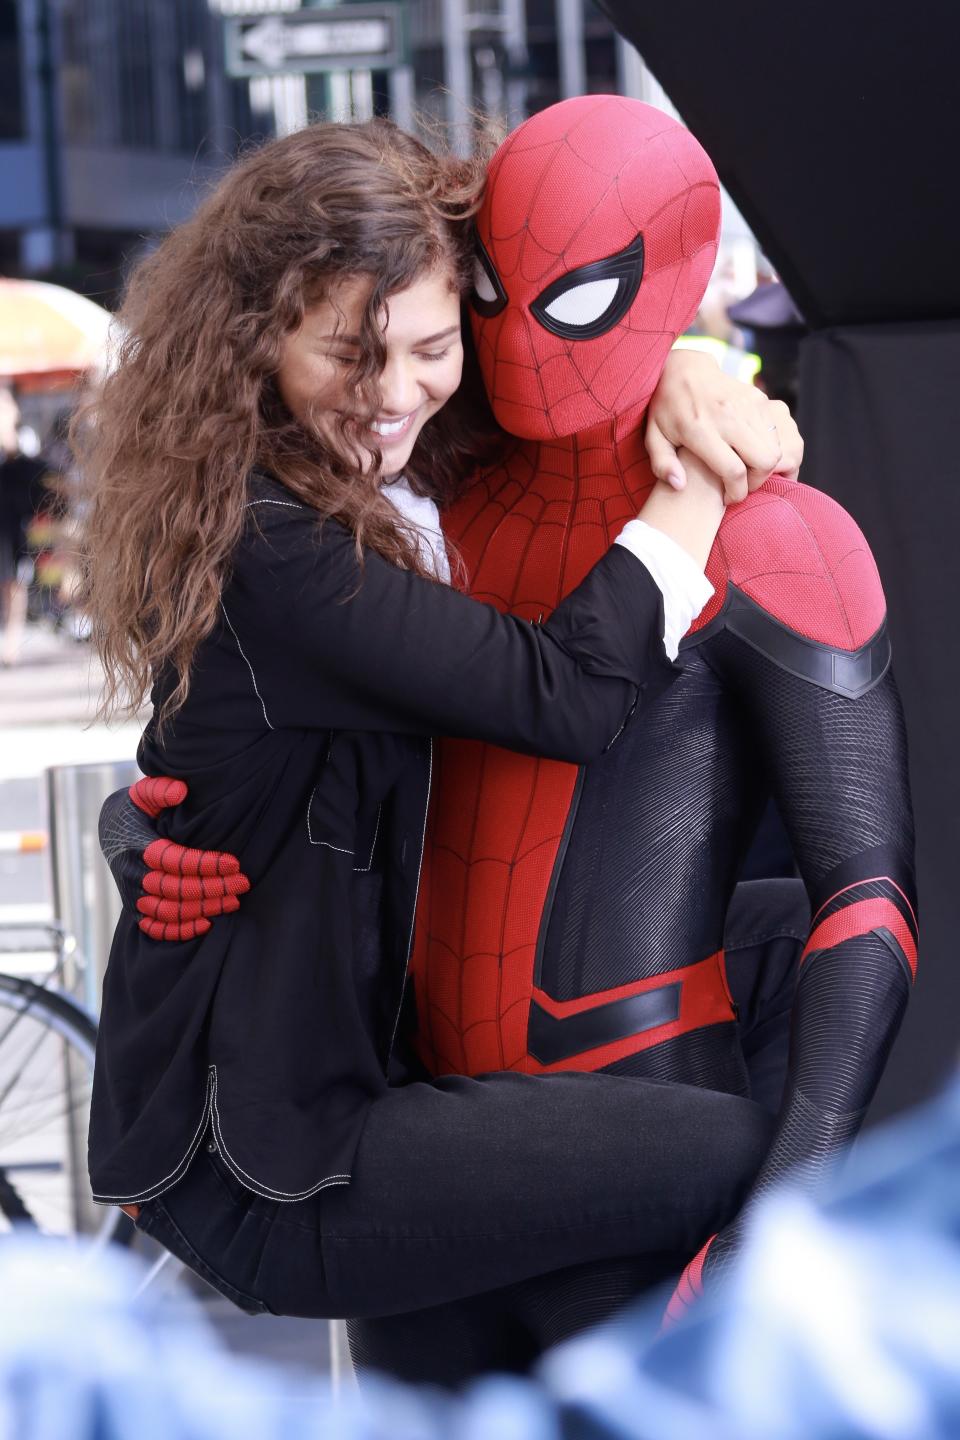 Previous MJ (Zendaya) and Spider-Man/Peter Parker (Tom) iterations (first, Kirsten Dunst and Tobey Maguire, and second, Andrew Garfield and Emma Stone) have had romantic relationships. So, naturally, people began speculating — was another romance afoot?